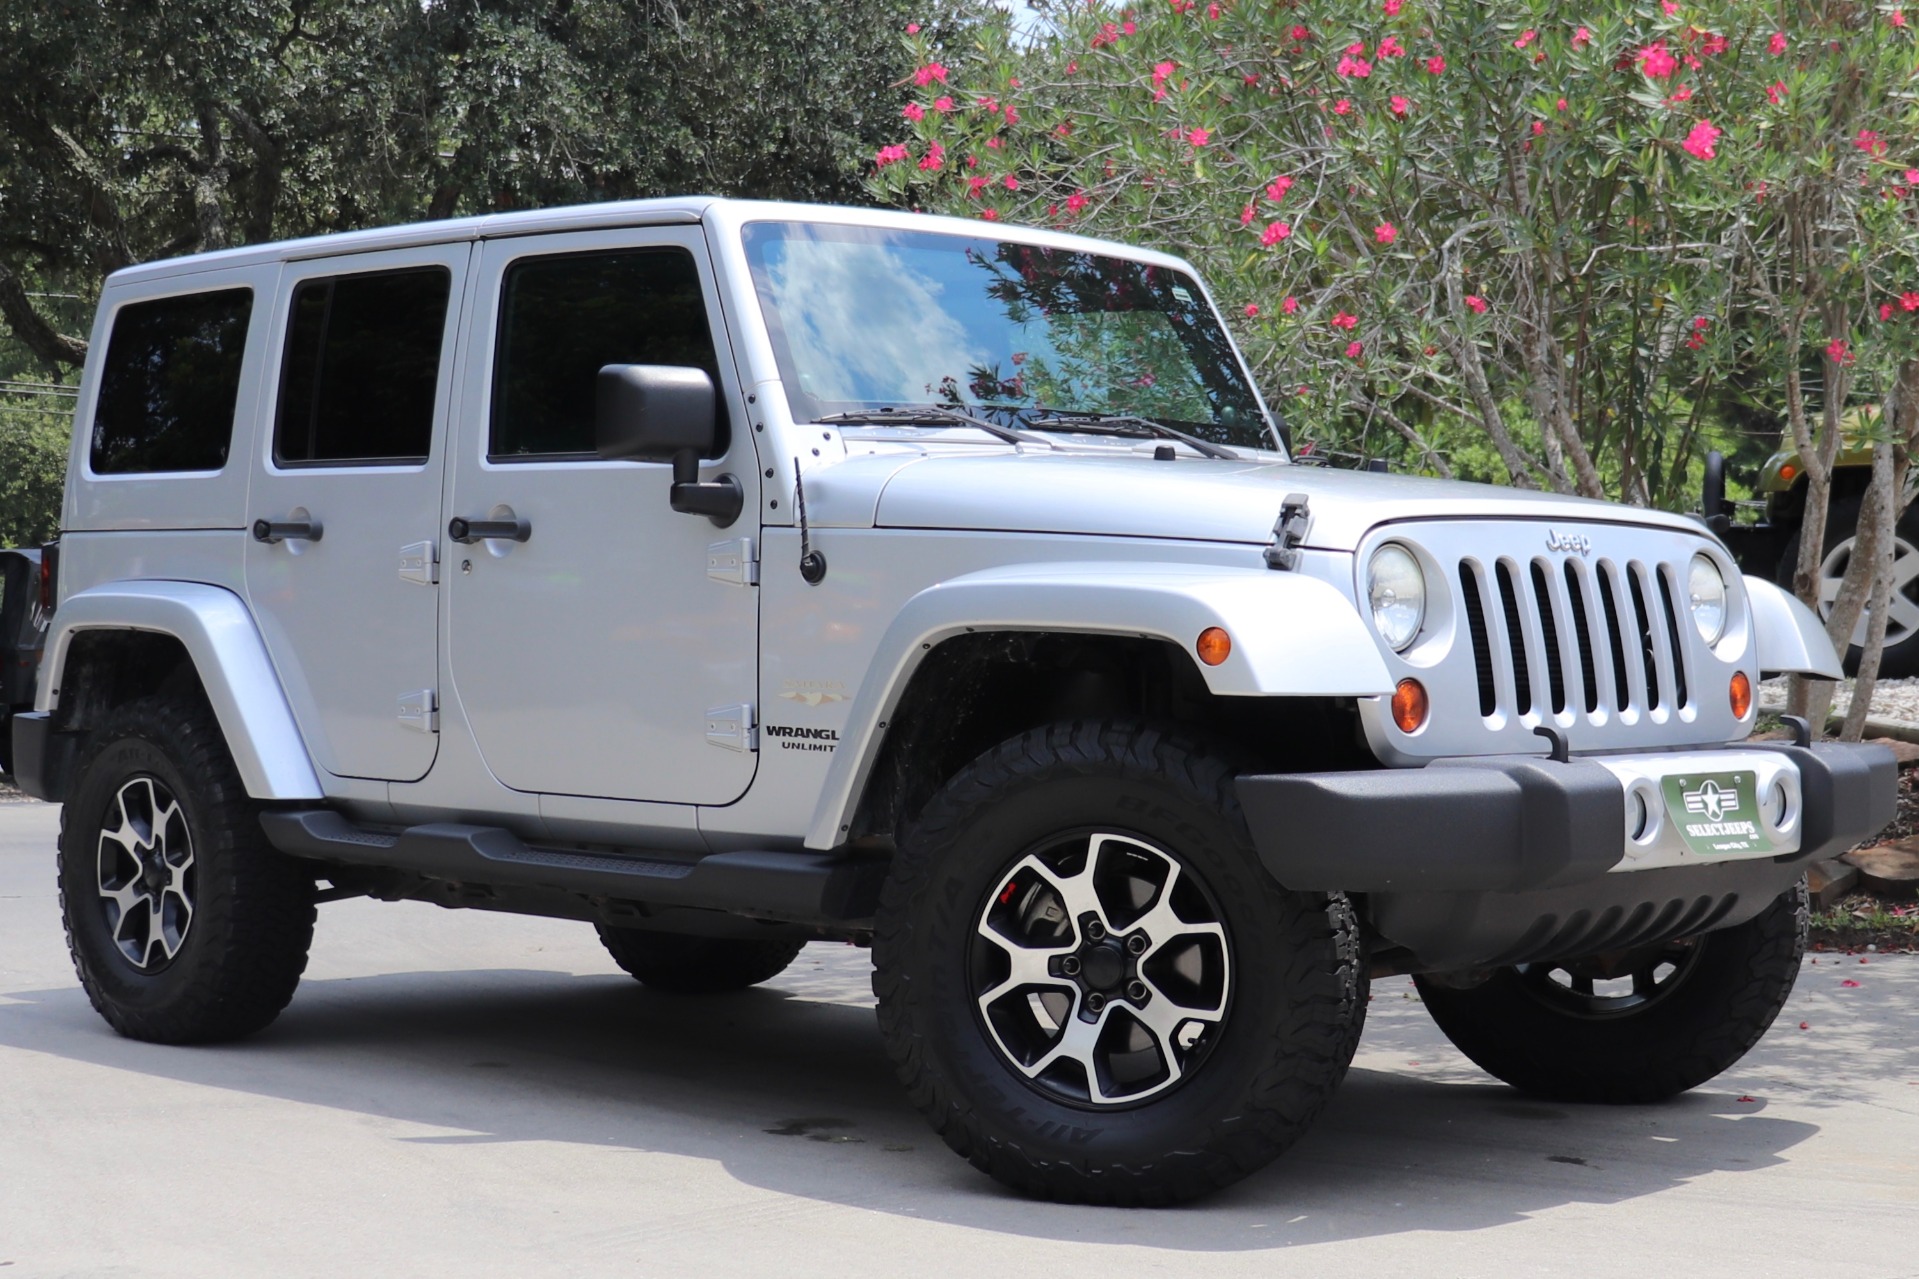 Used 2012 Jeep Wrangler Unlimited Sahara For Sale ($25,995) | Select Jeeps  Inc. Stock #253926